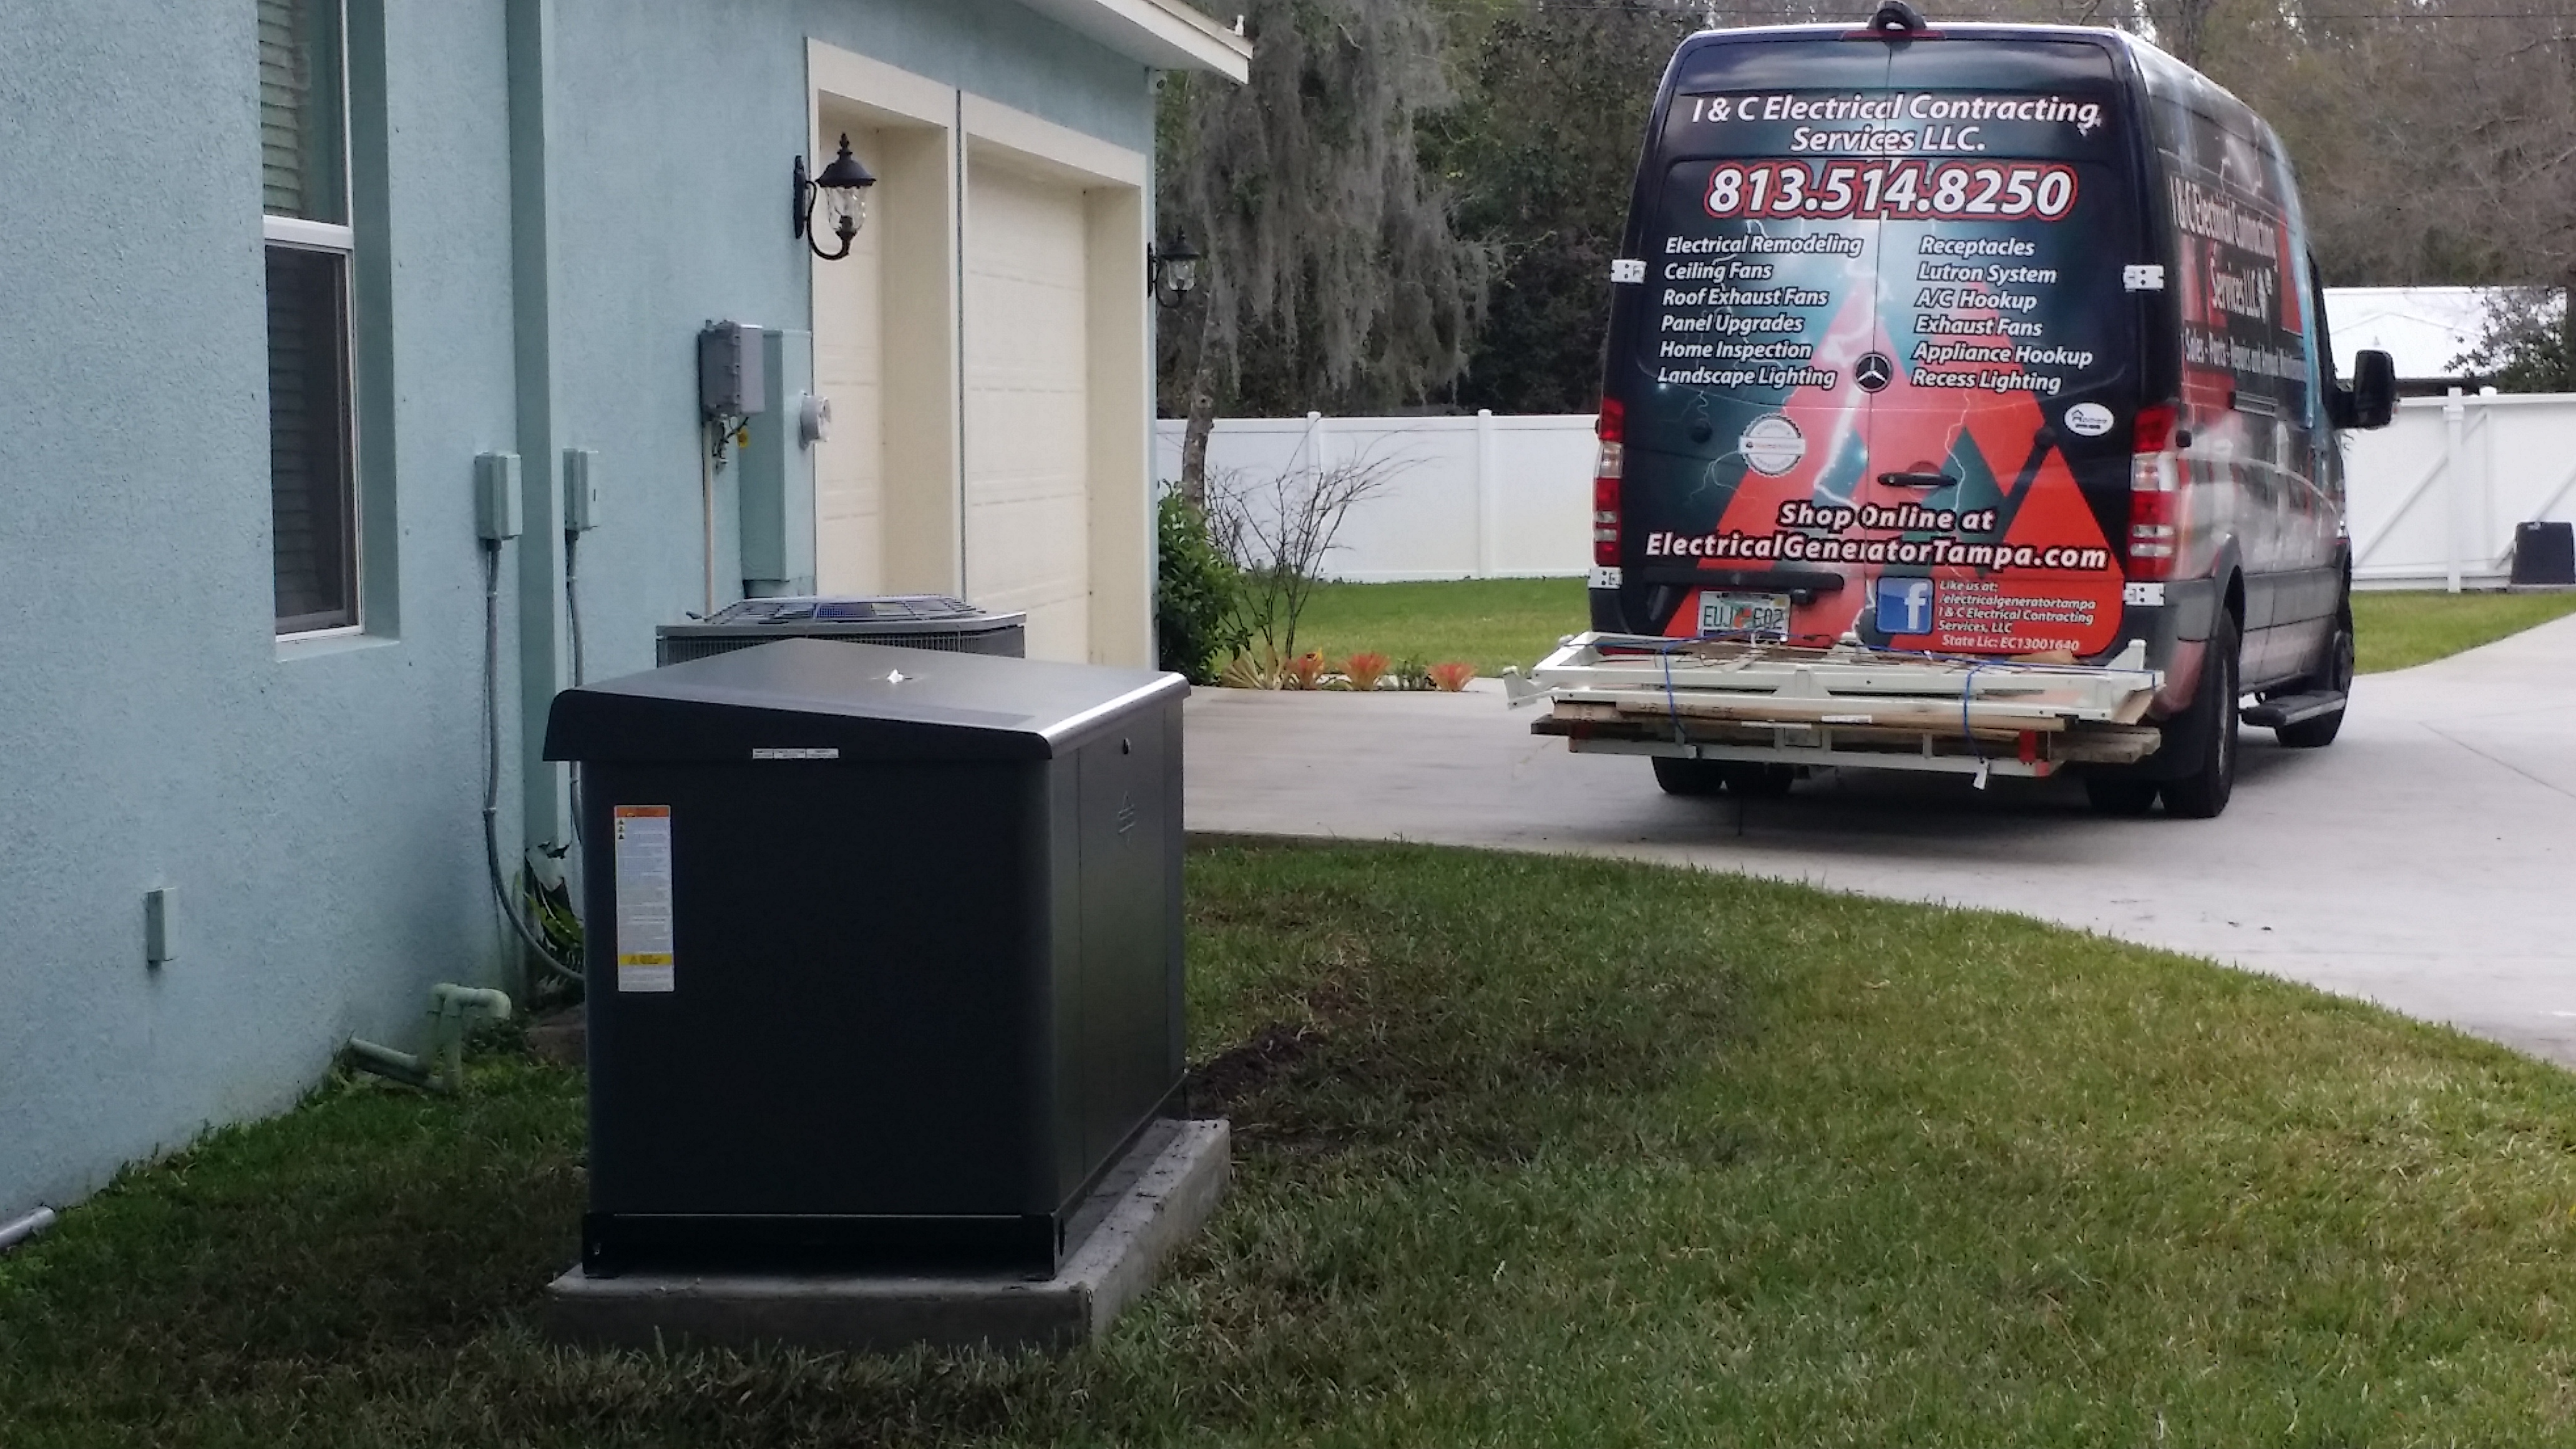 Call us today for our Generator deals!